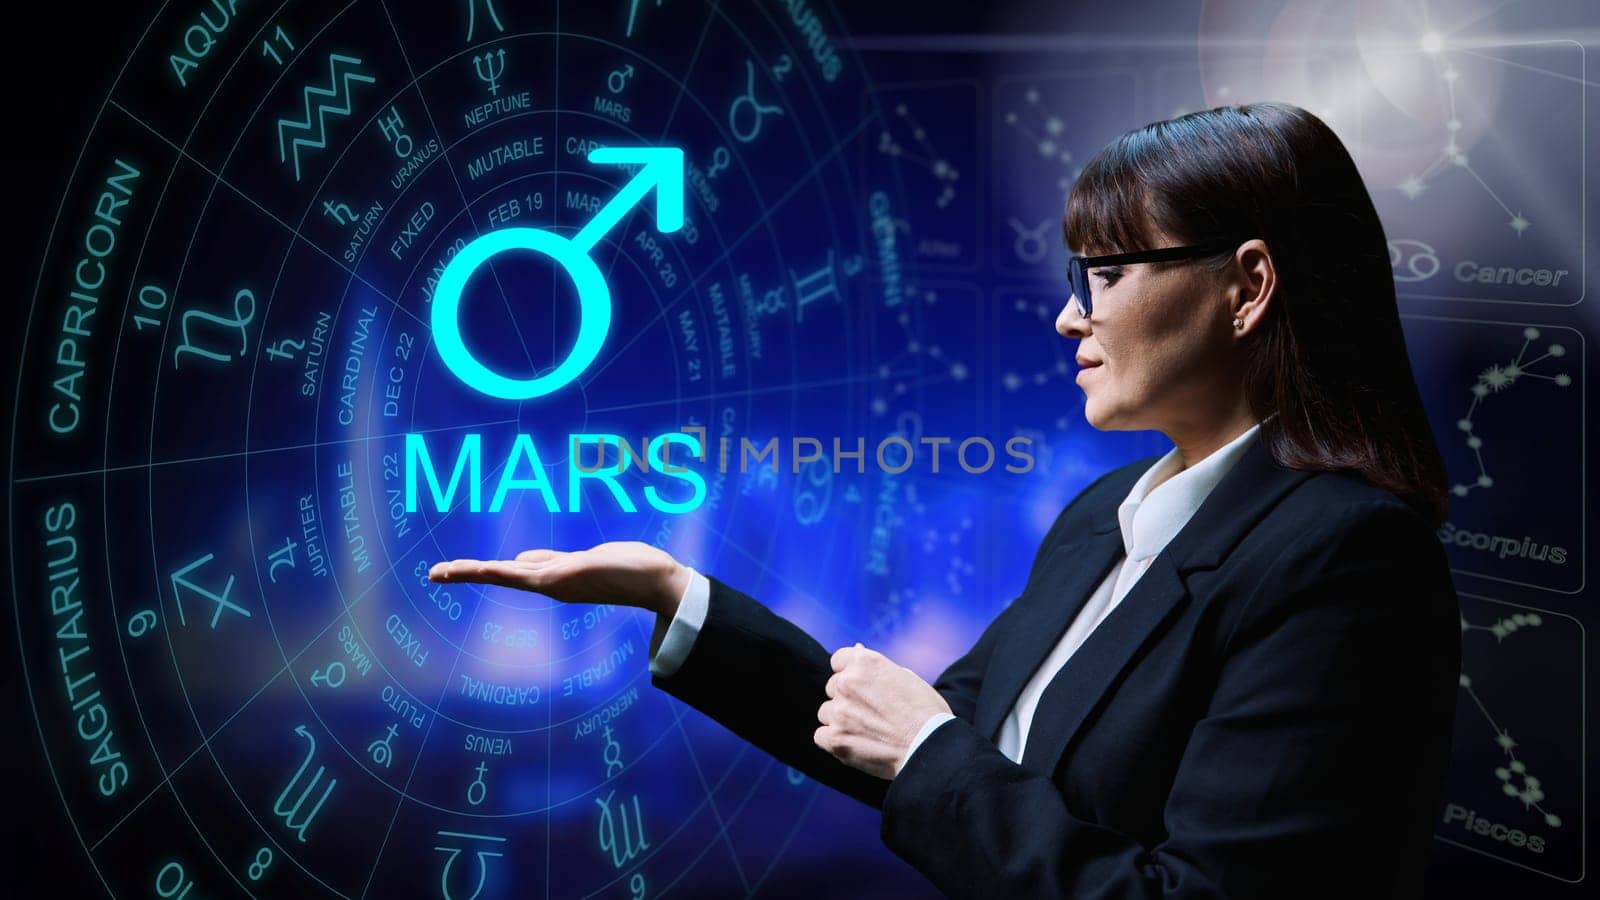 Astrological forecast, meaning, influence of planet Mars. Serious woman on starry background showing Mars sign symbol. Future forecast, astrology, horoscope, advice, universe, exoteric concept